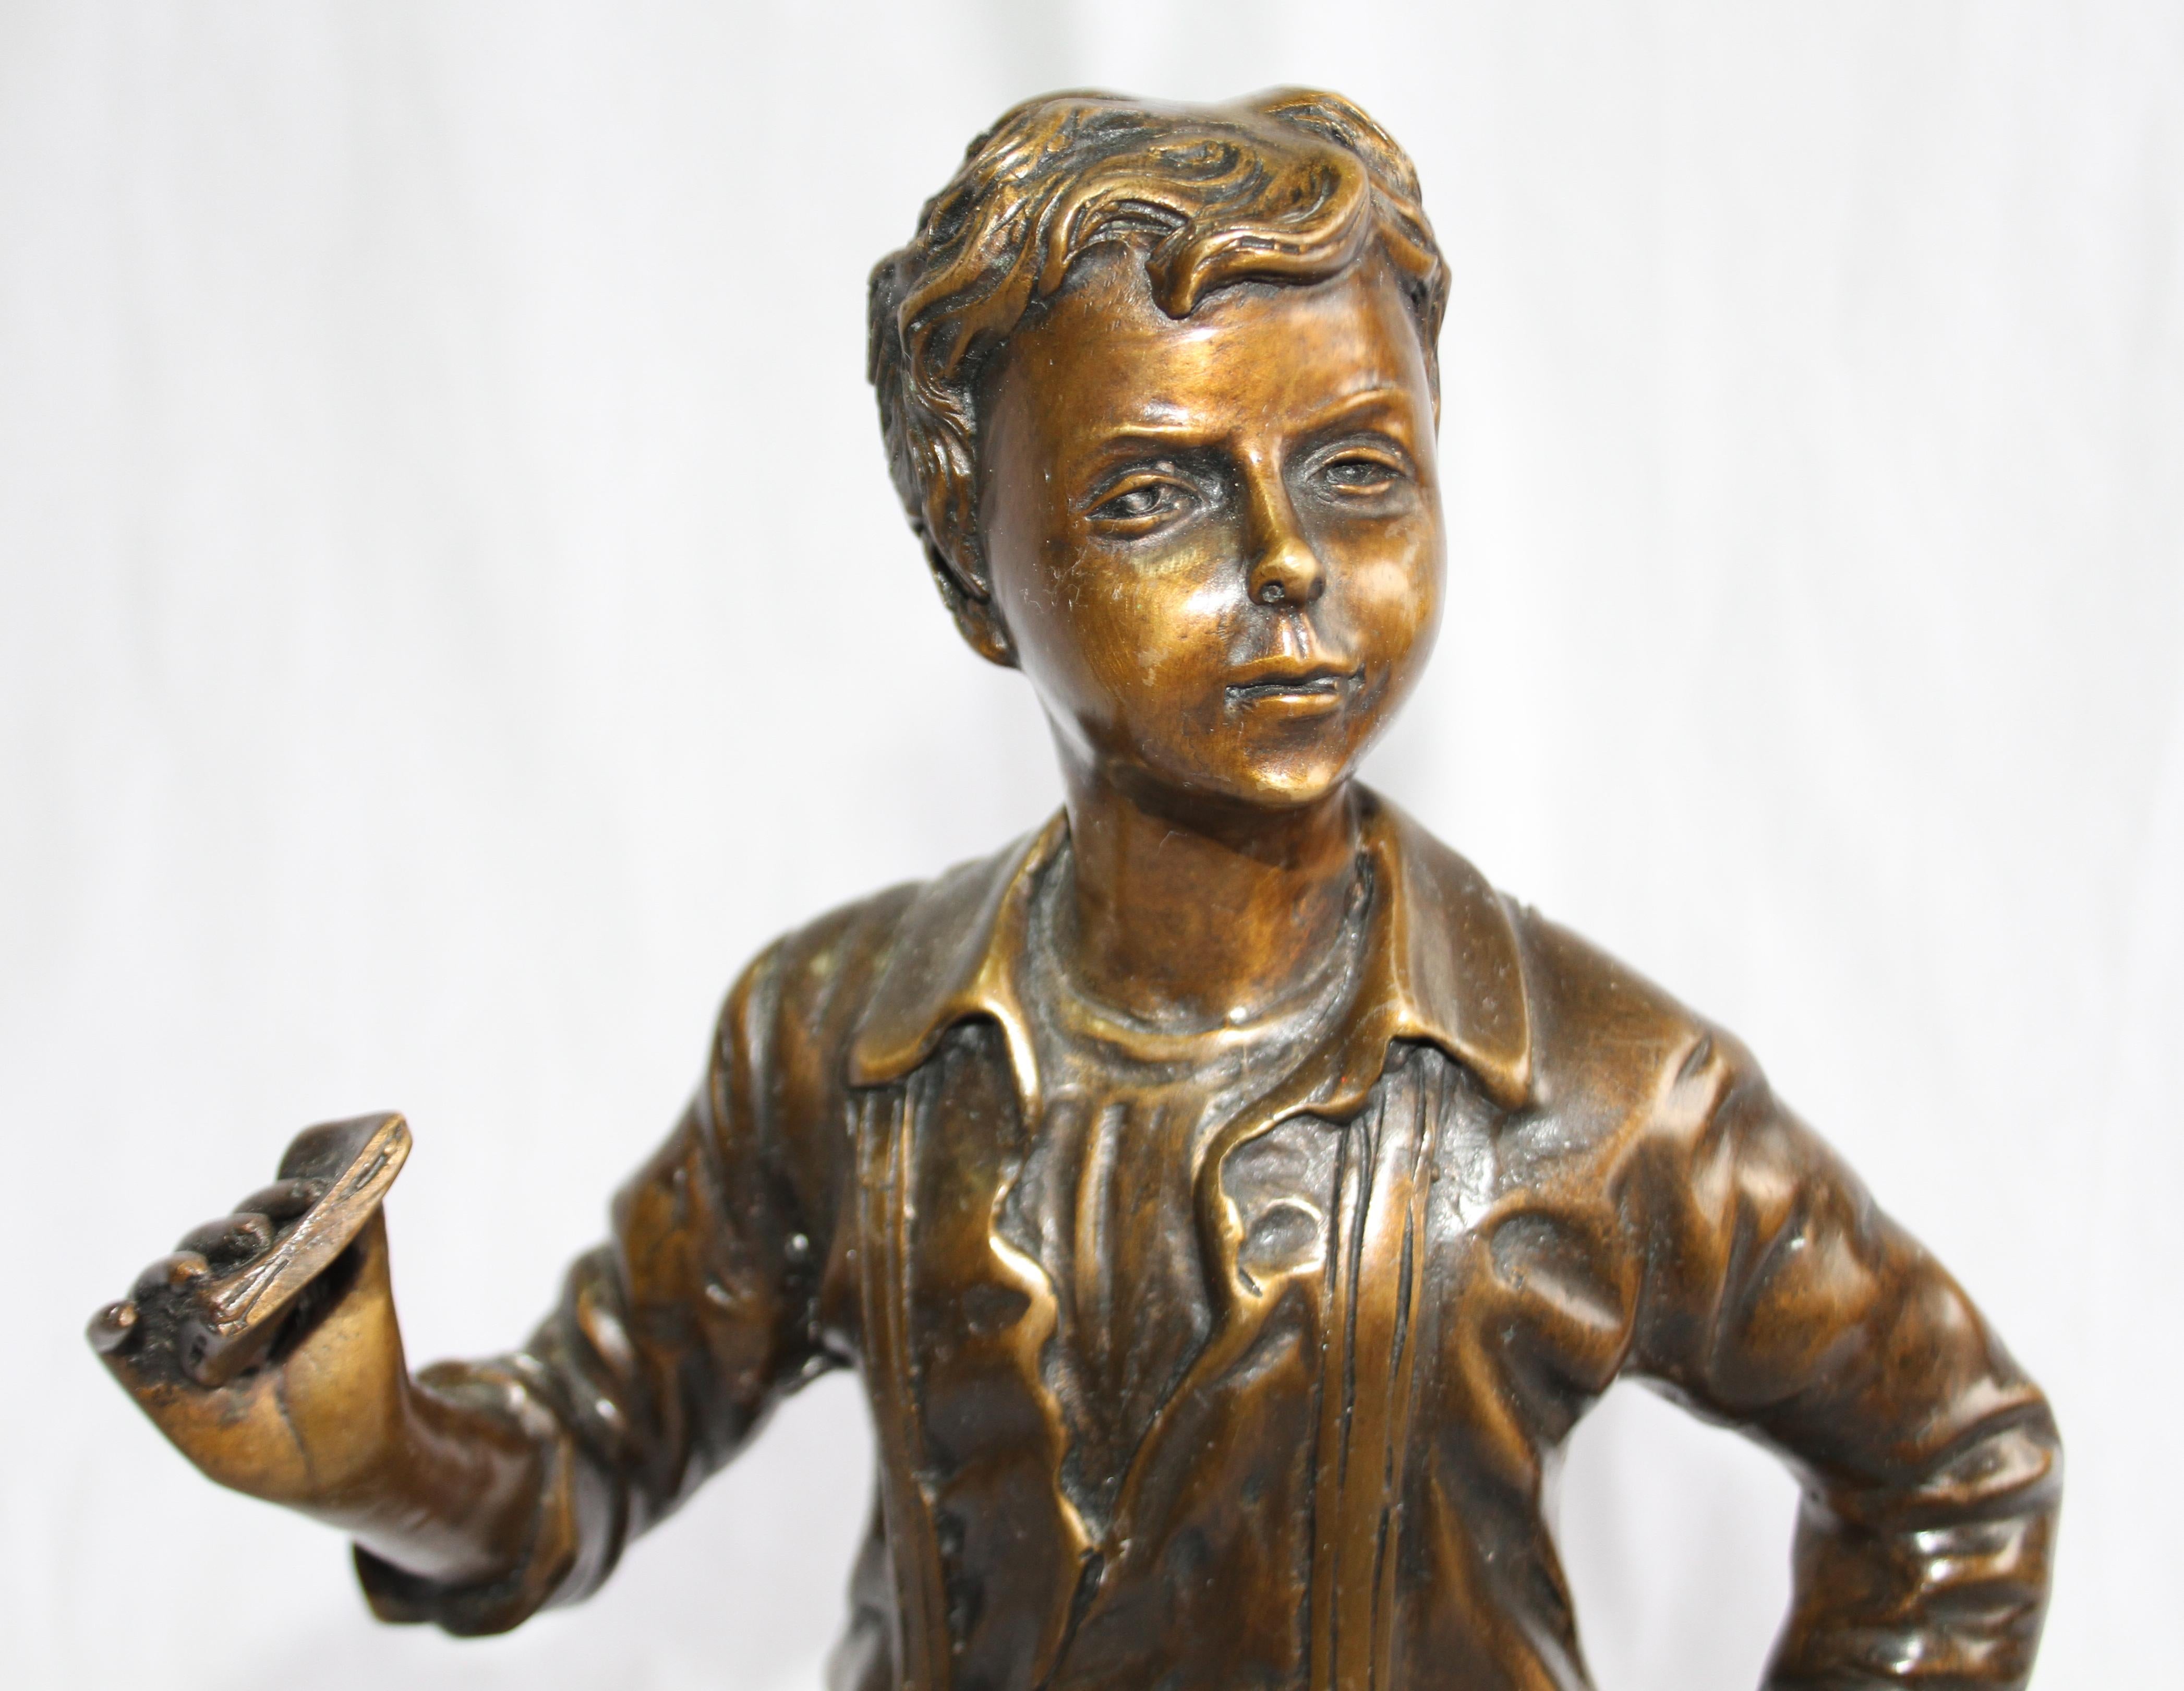 A bronze figure of a boy. French, mid to early 20th century. Mid brown patination. Shown standing wearing braces and breeches. On a circular base.